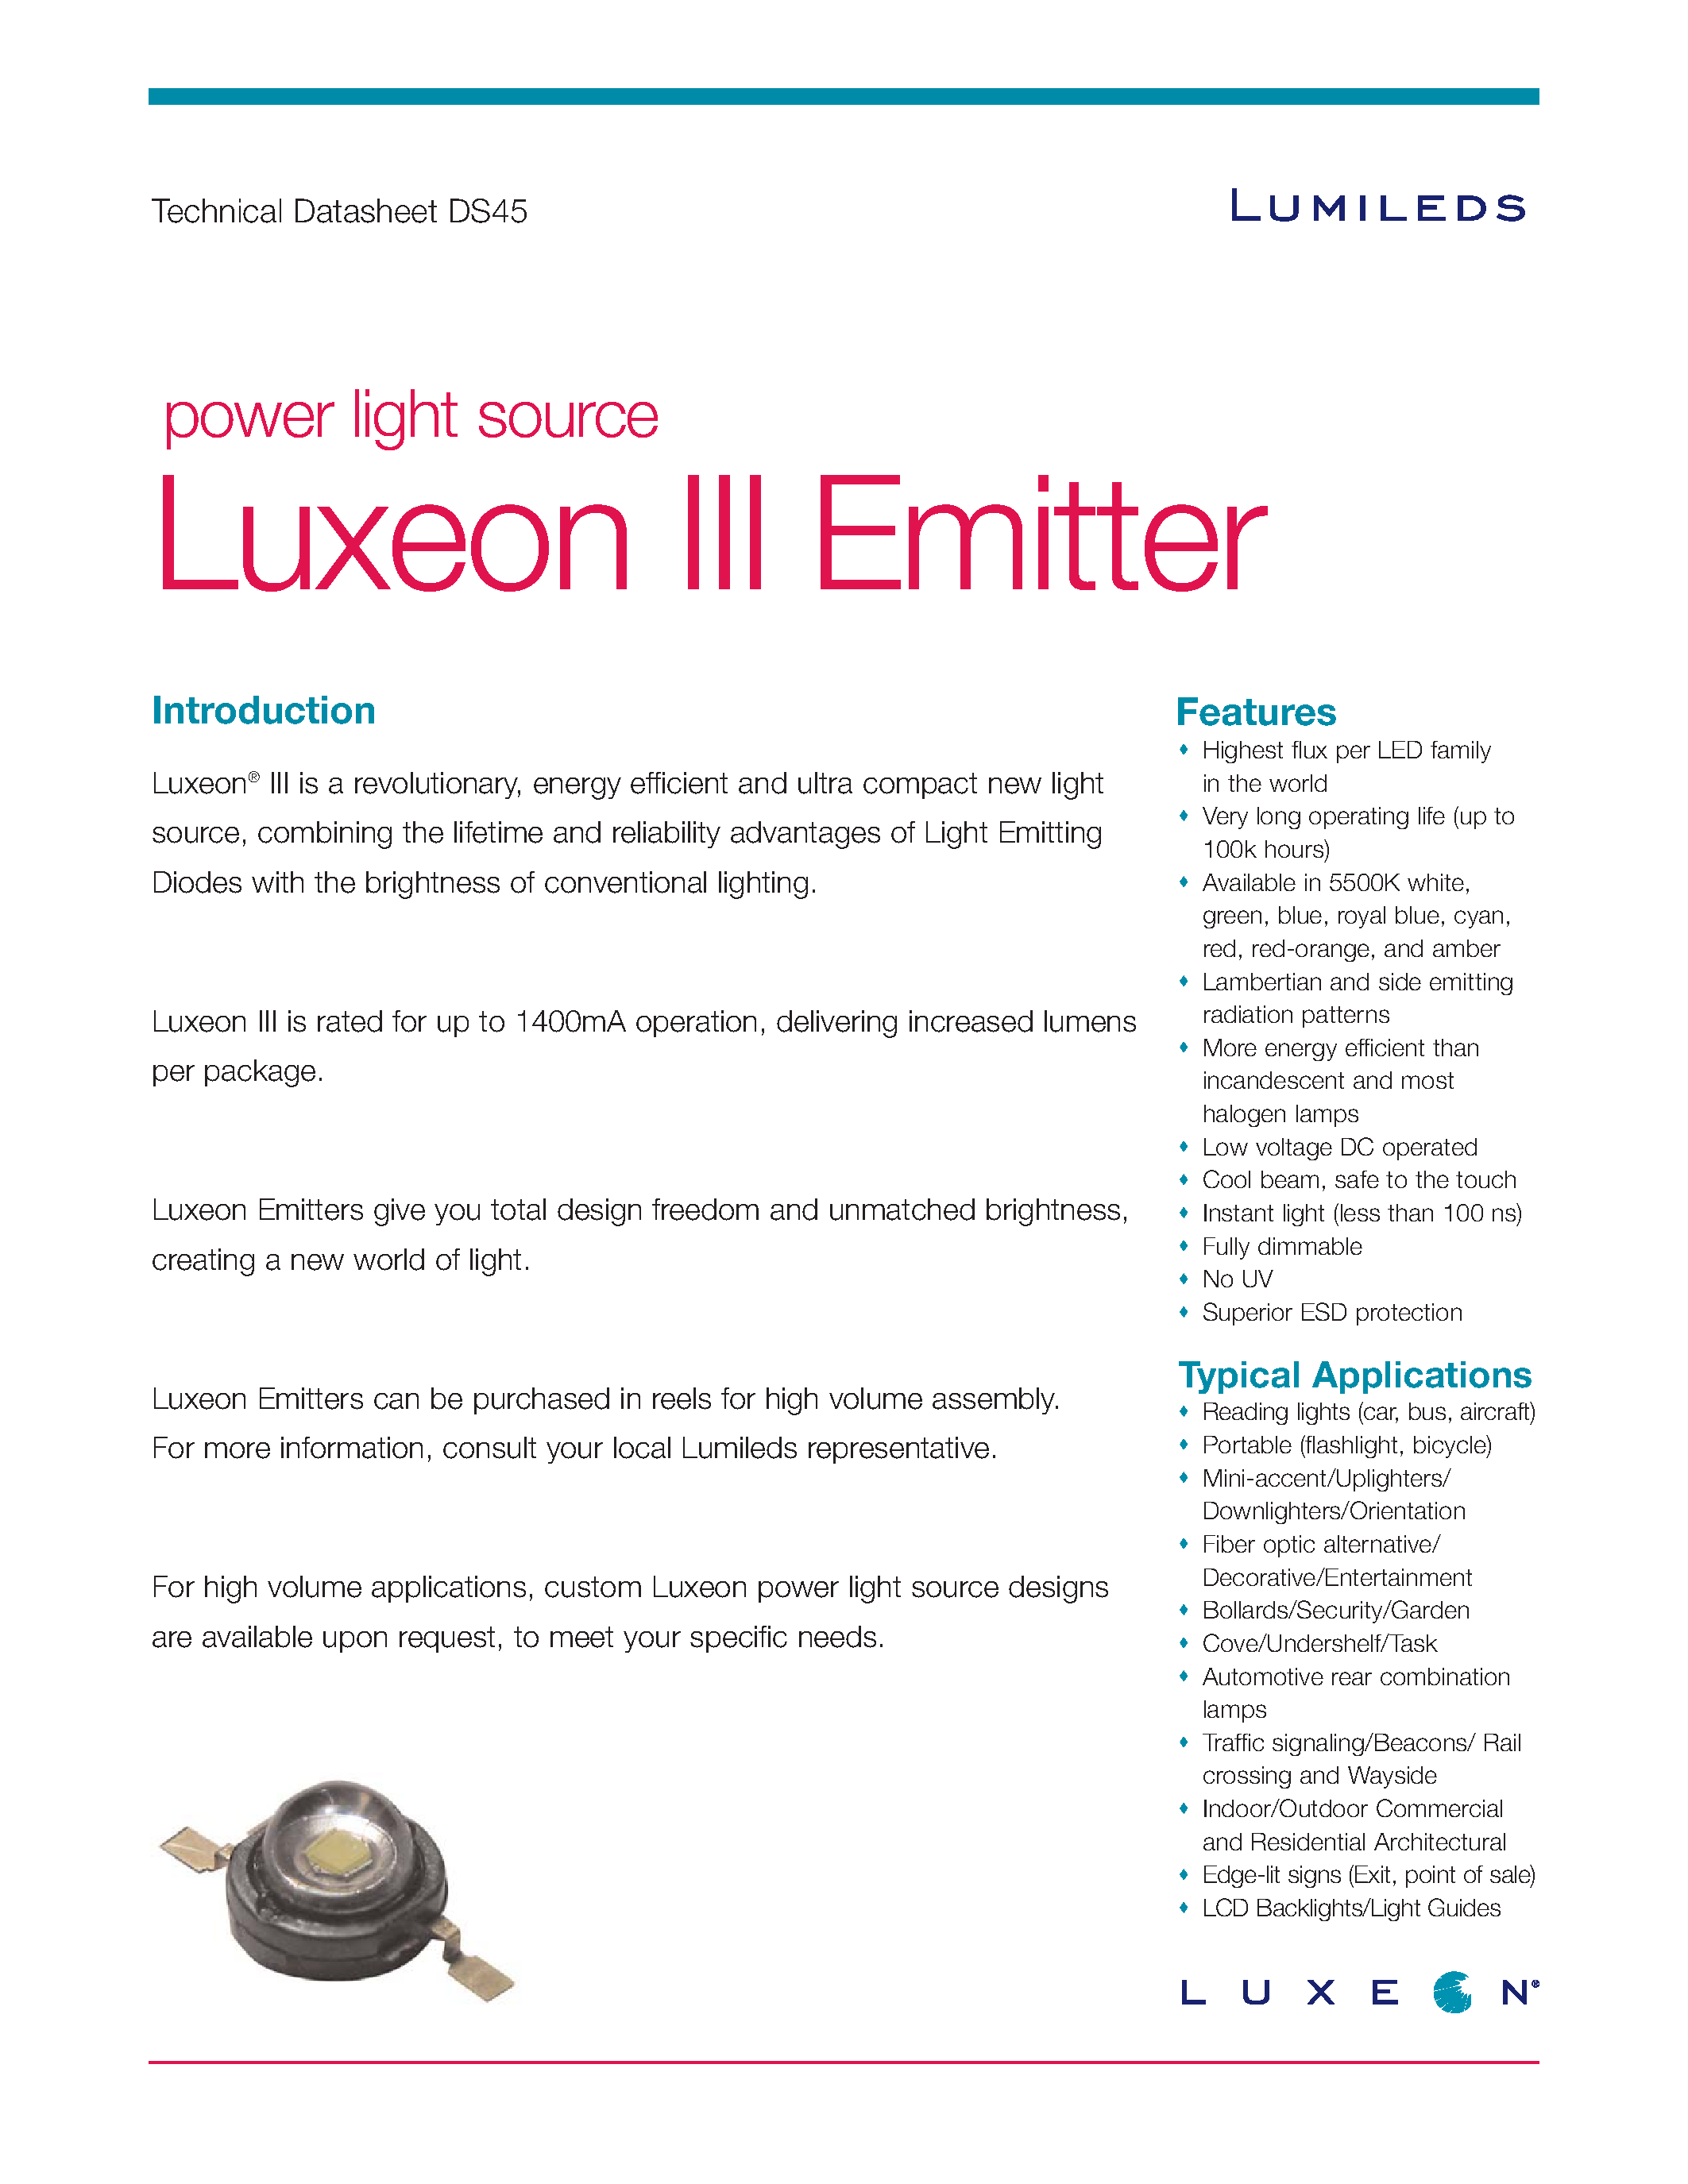 Даташит LXHL-DB09 - (LXHL-xxxx) Combining the lifetime and reliability Advantages of Light Emitting Diodes страница 1